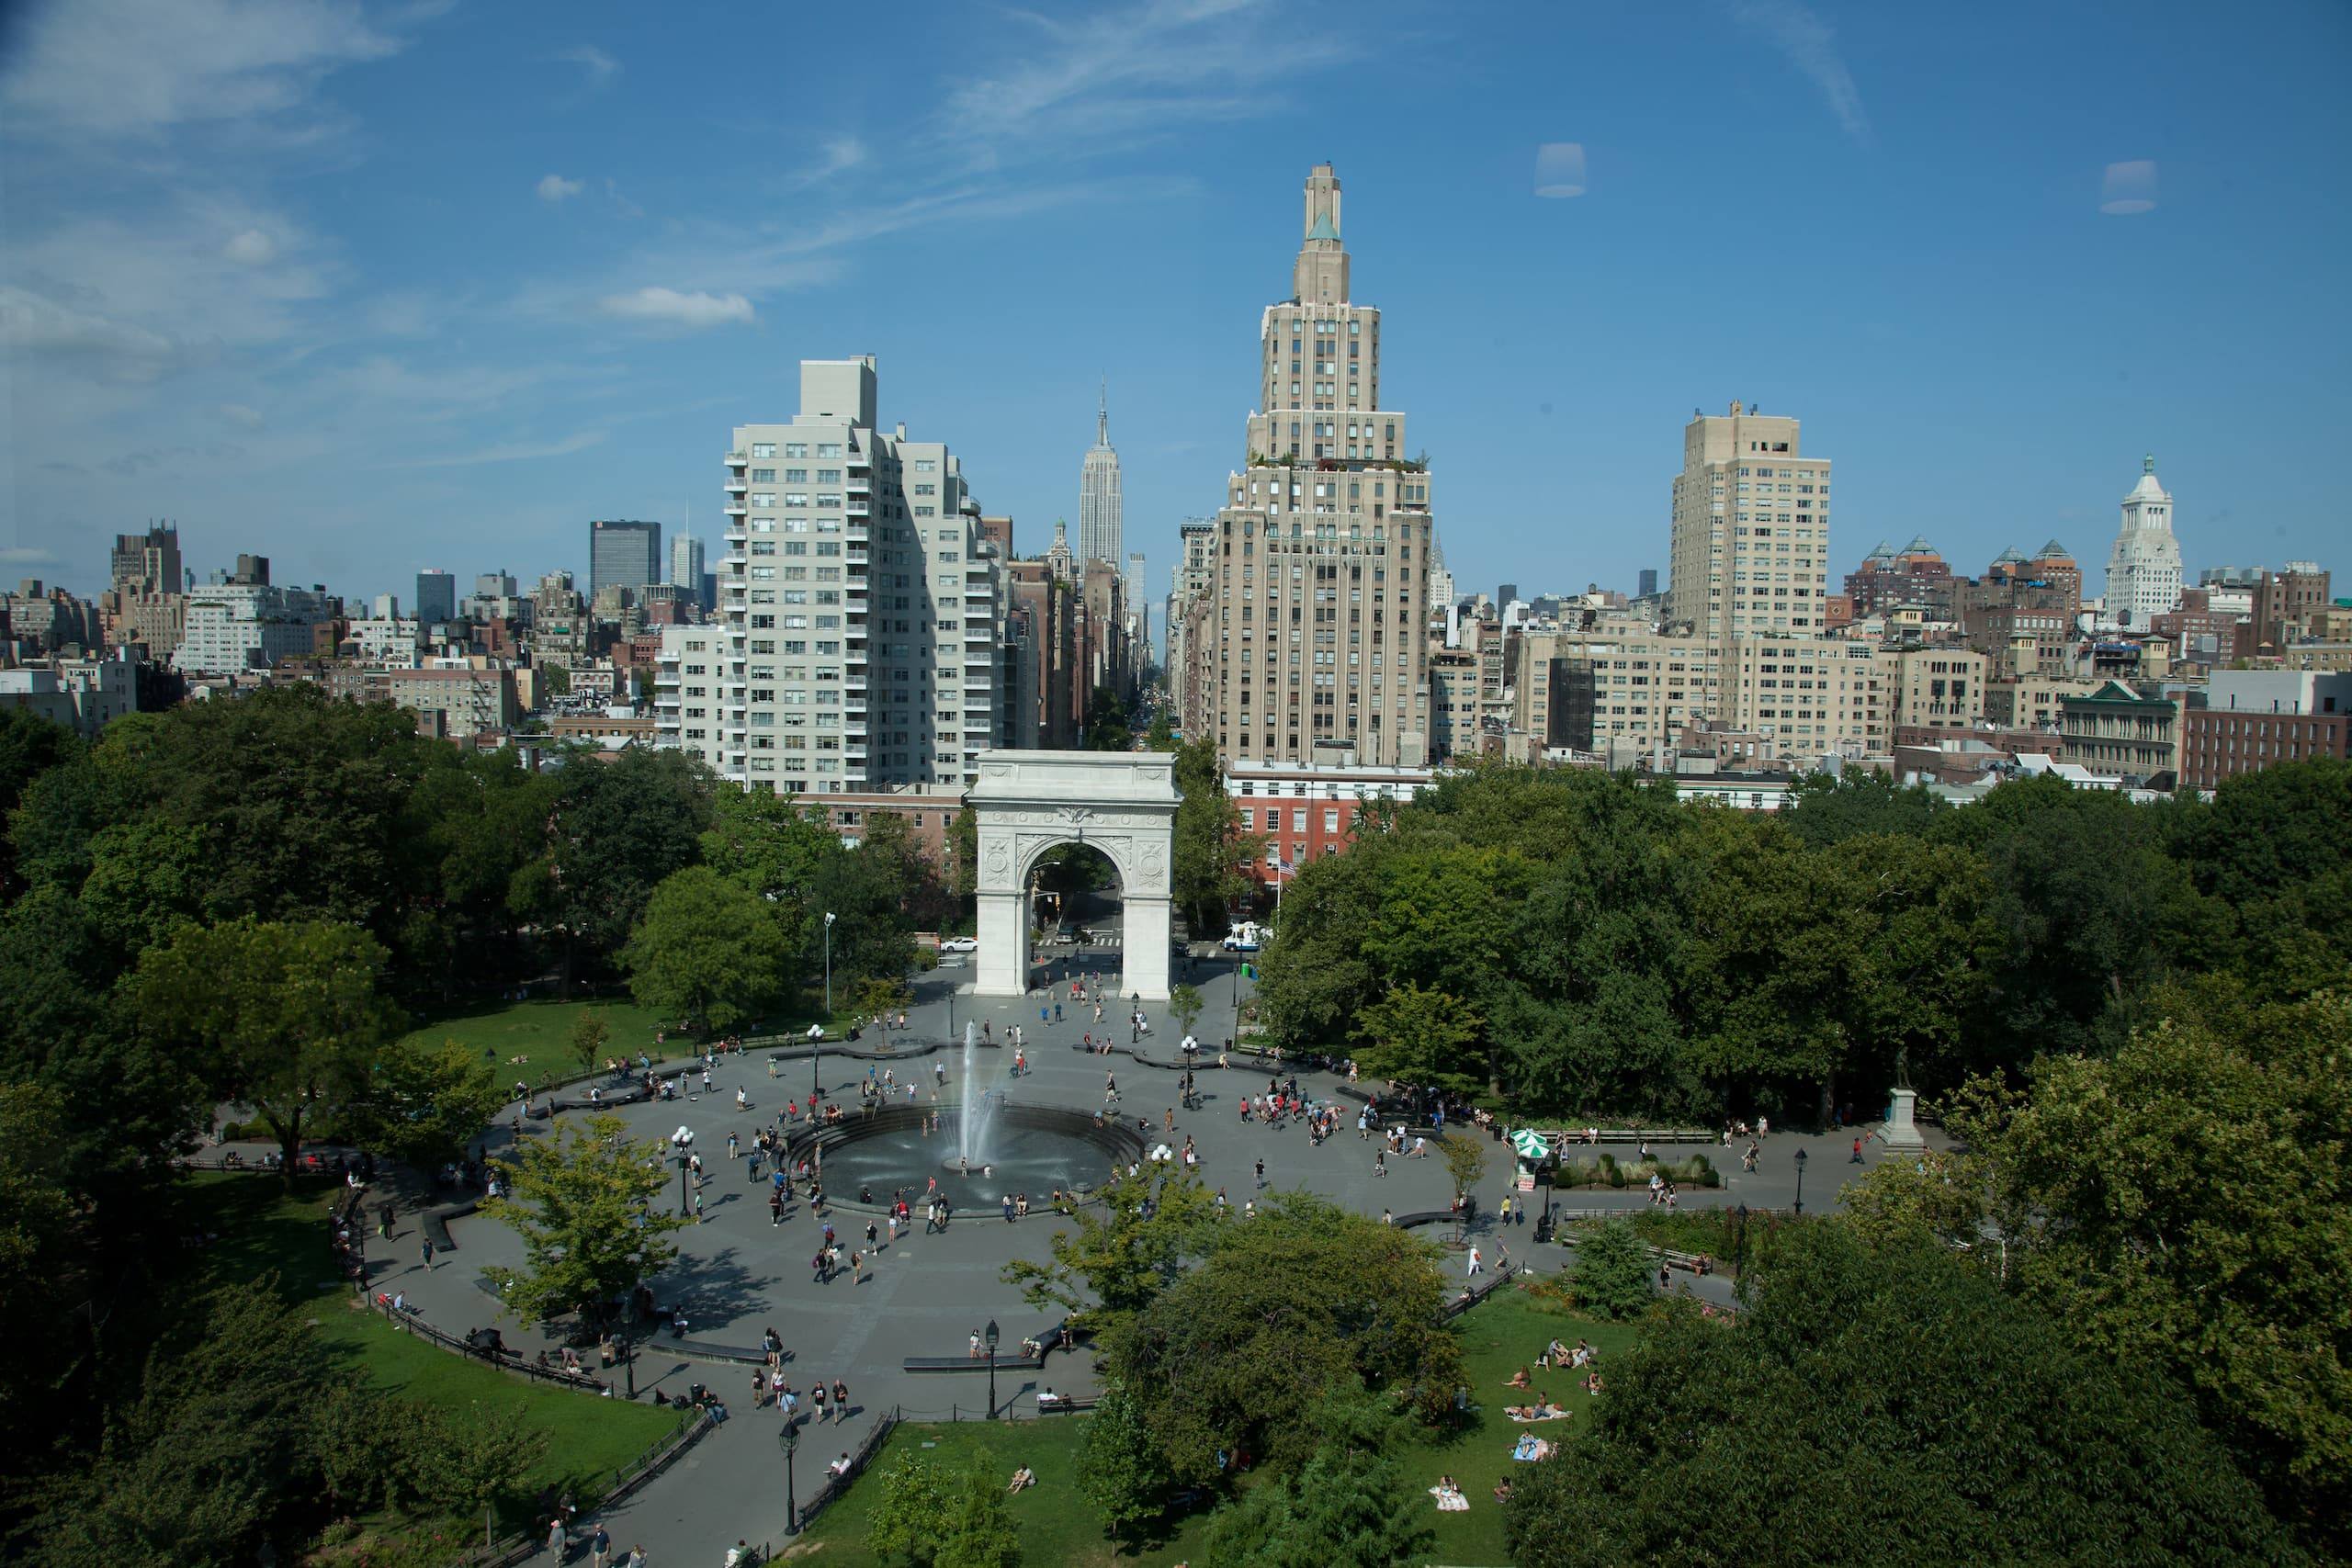 {A bird's eye view of the fountain and arch at Washington Square Park.]